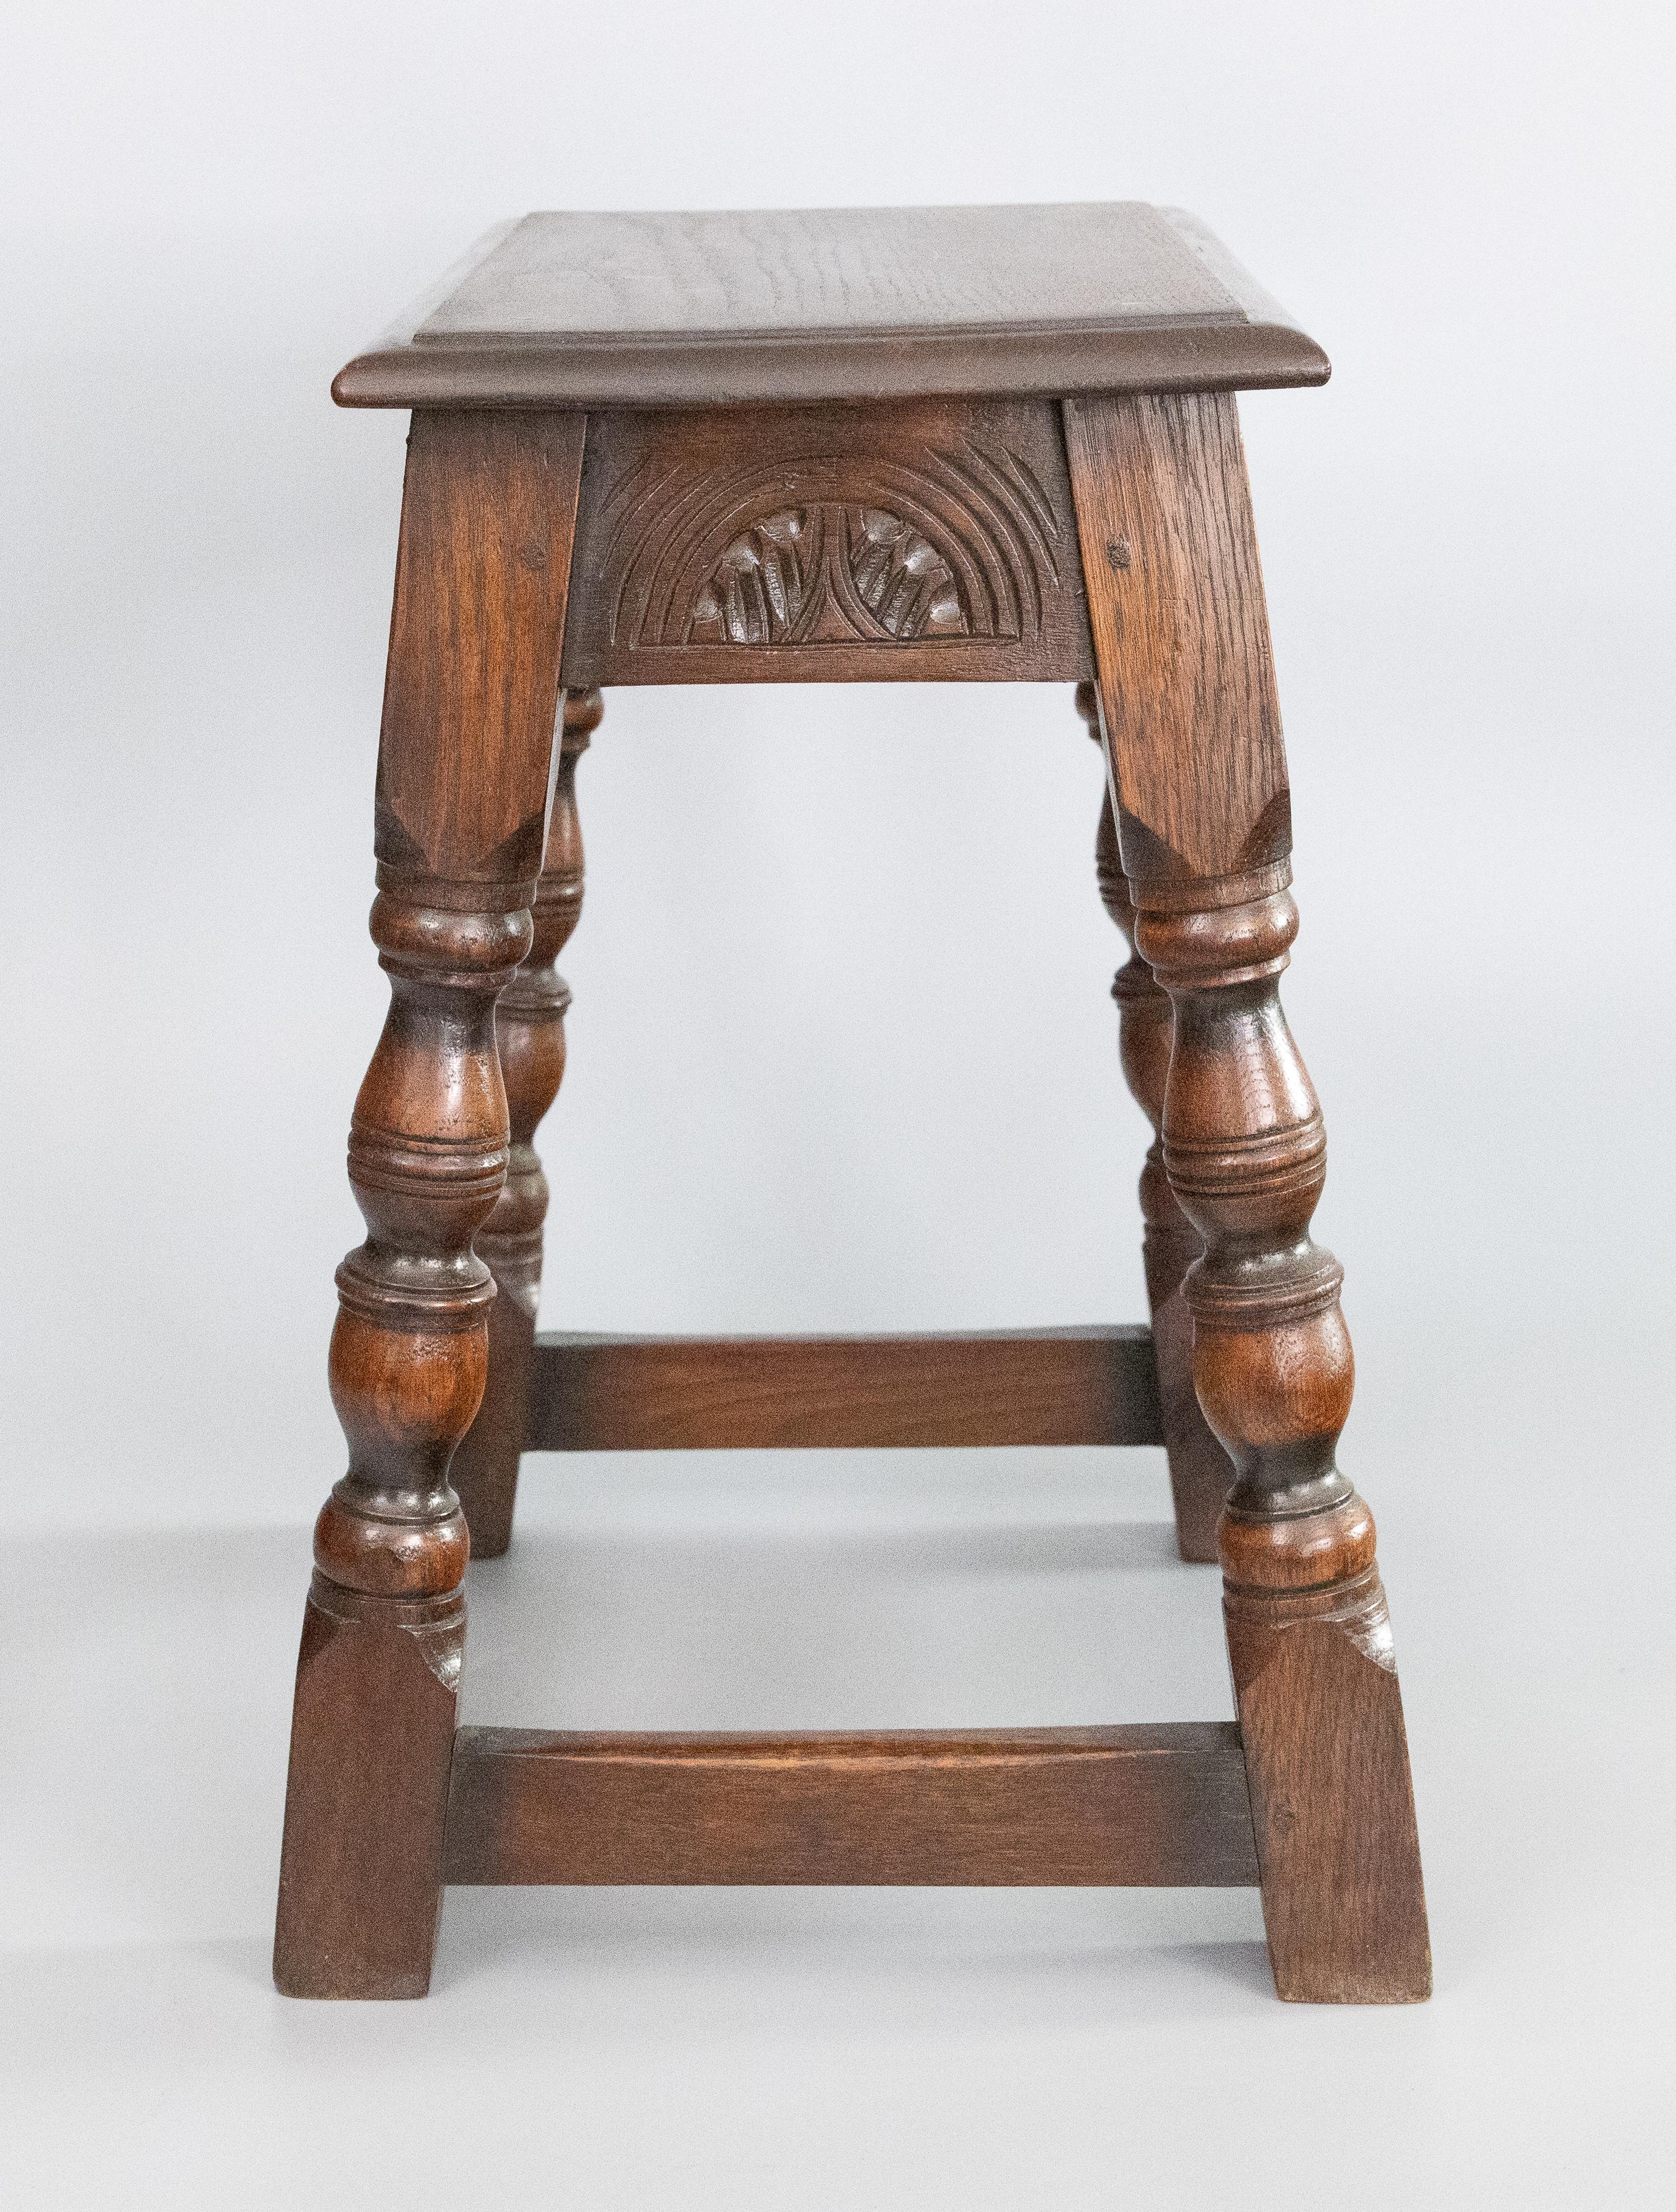 Hand-Carved 19th Century English Carved Oak Pegged Joint Stool Side Table For Sale